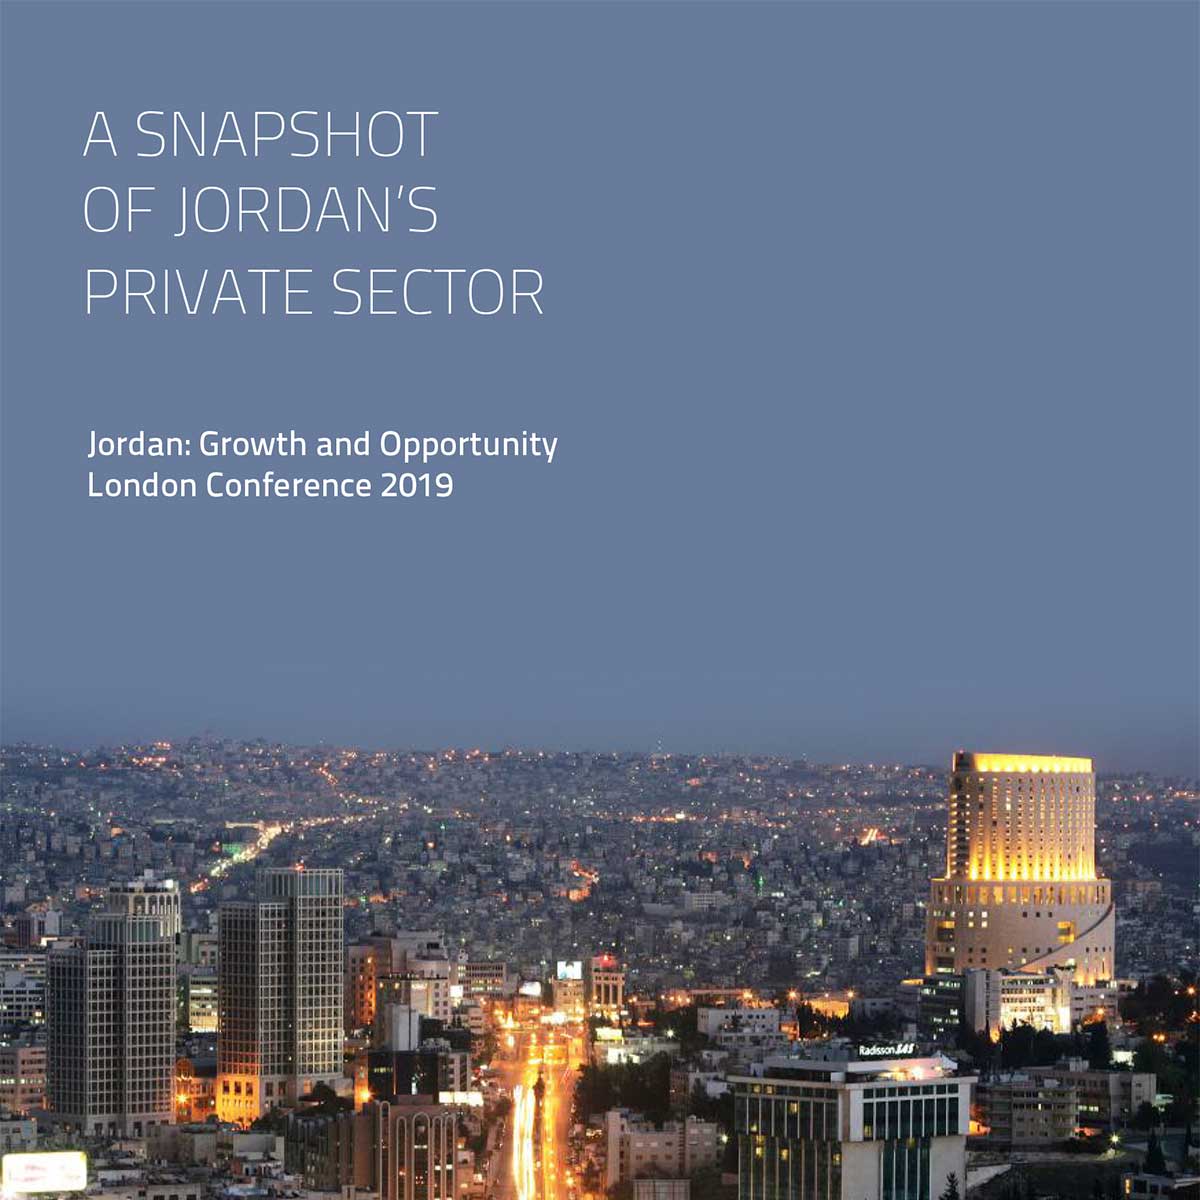 Company Guide: A Snapshot of Jordan’s Investment and Market Opportunities – (February 2019)